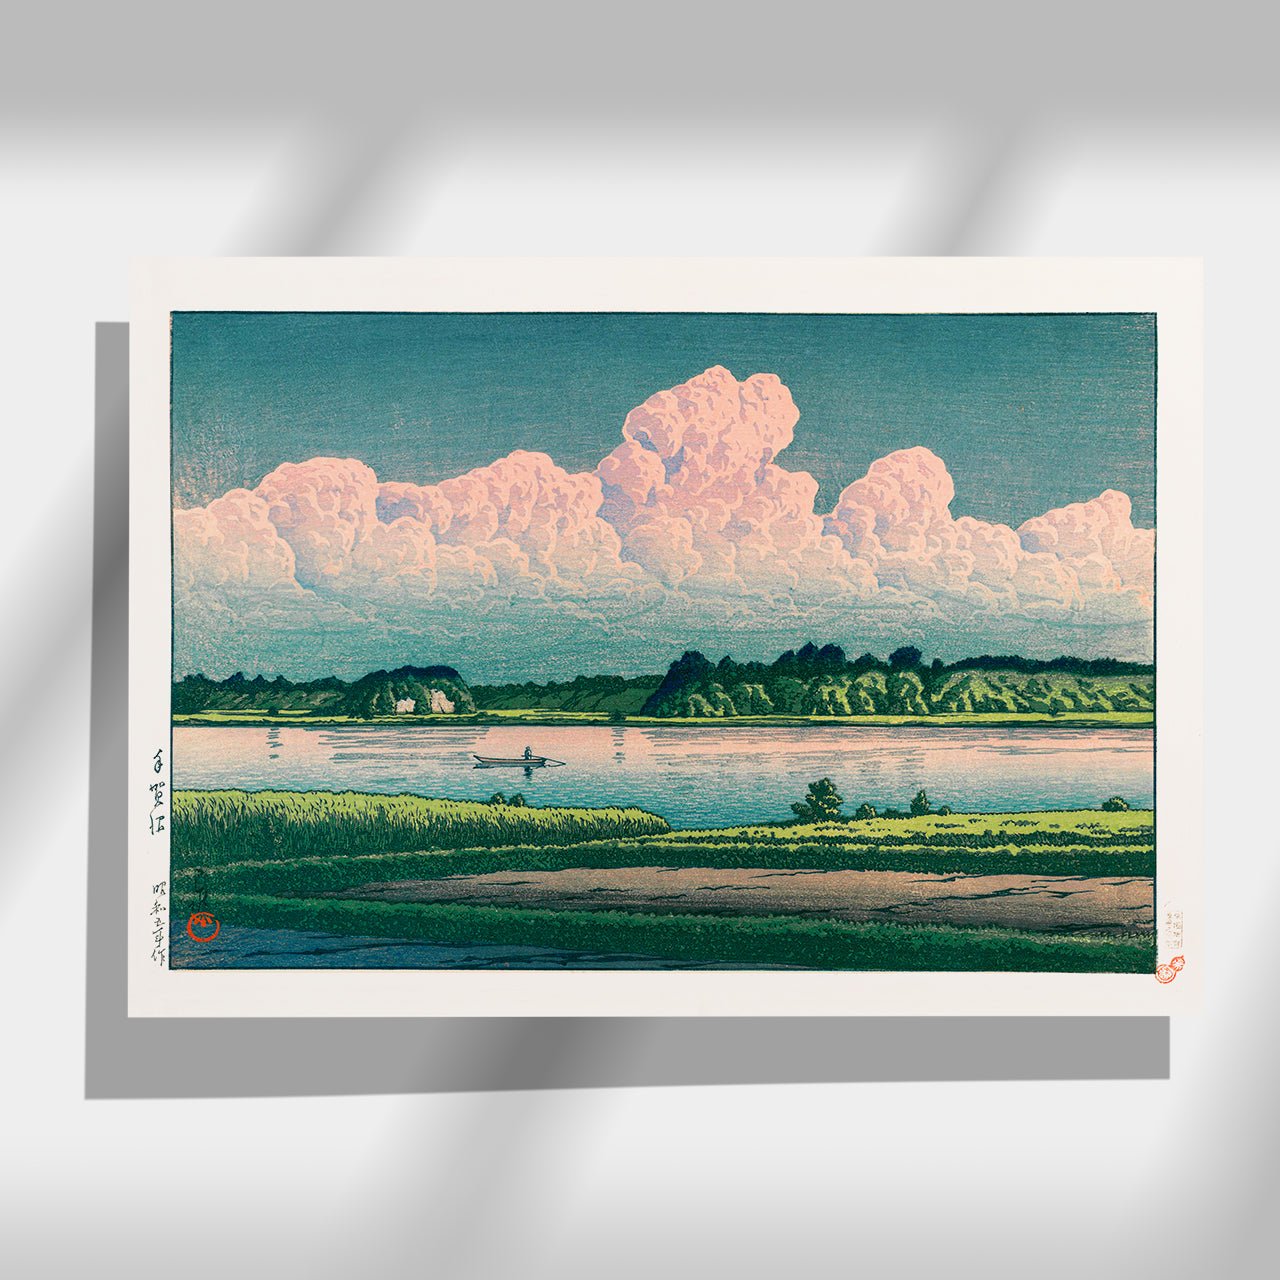 Japanese Art Poster: Summer Dusk. Iridocumulus clouds tinged with pink, painting of clouds over the water